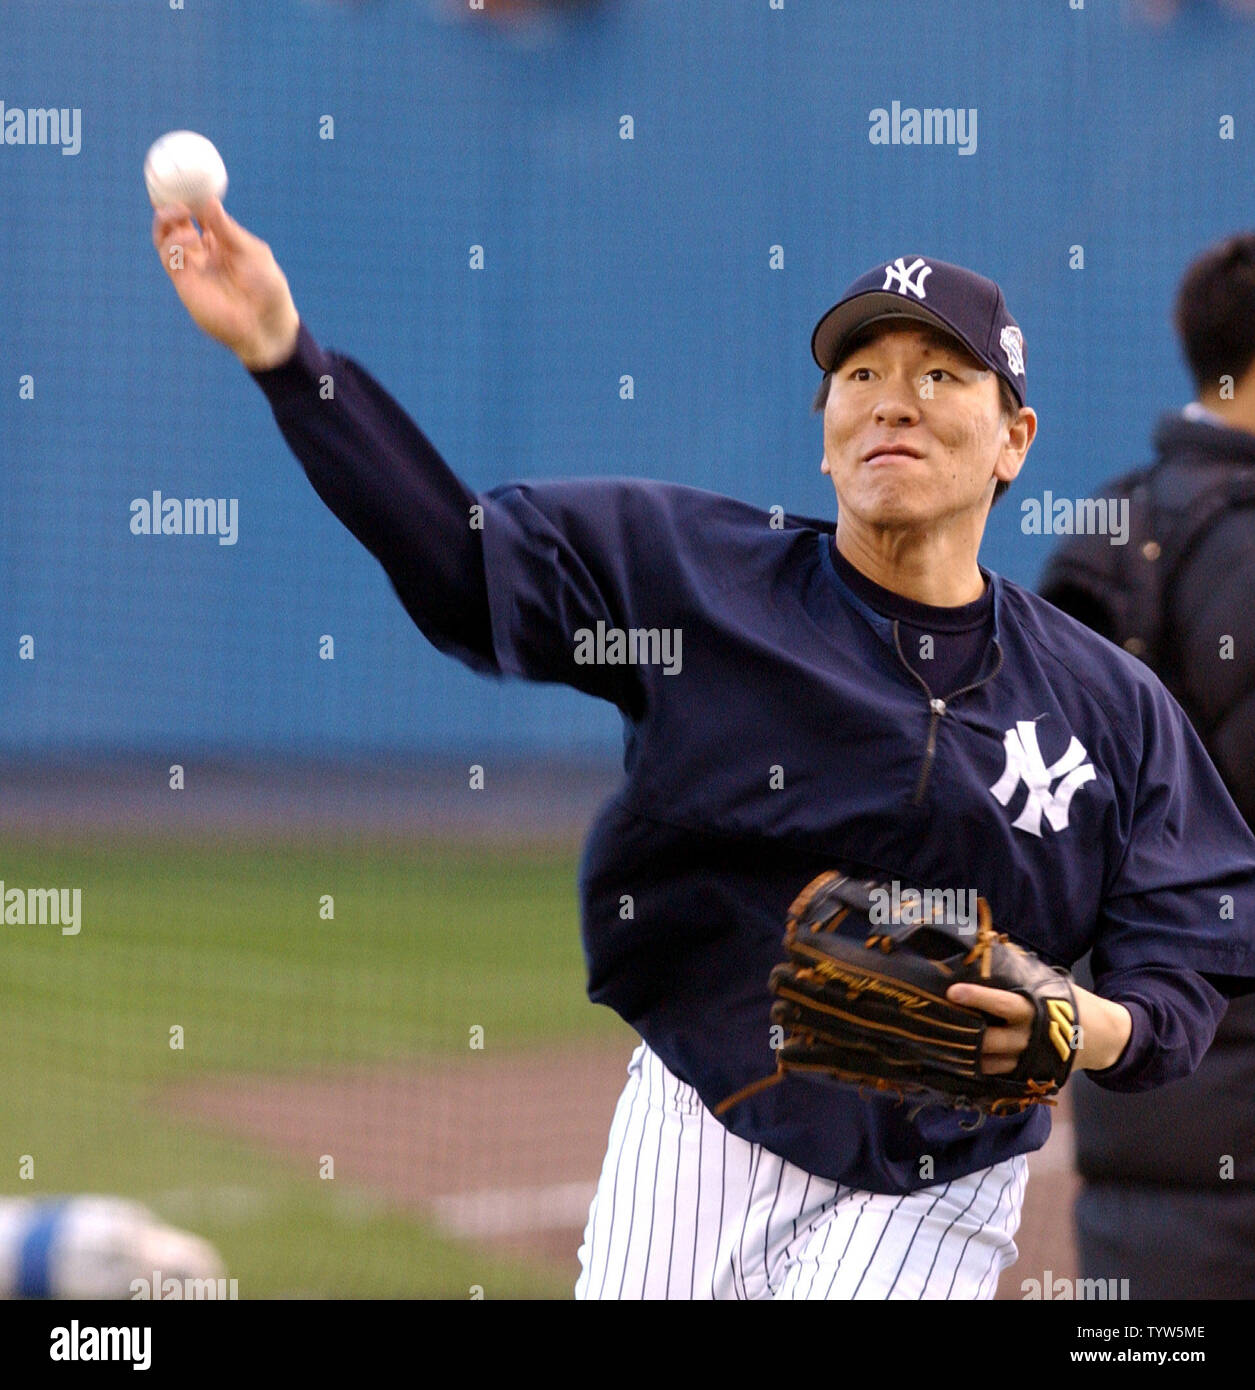 The New York Yankees' Hideki Matsui warms up before Game 2 of the World Series against the Florida Marlins on October 19, 2003, at Yankee Stadium. The Marlins defeated the Yankees 3-2 in Game 1.    (UPI/Roger L. Wollenberg) Stock Photo